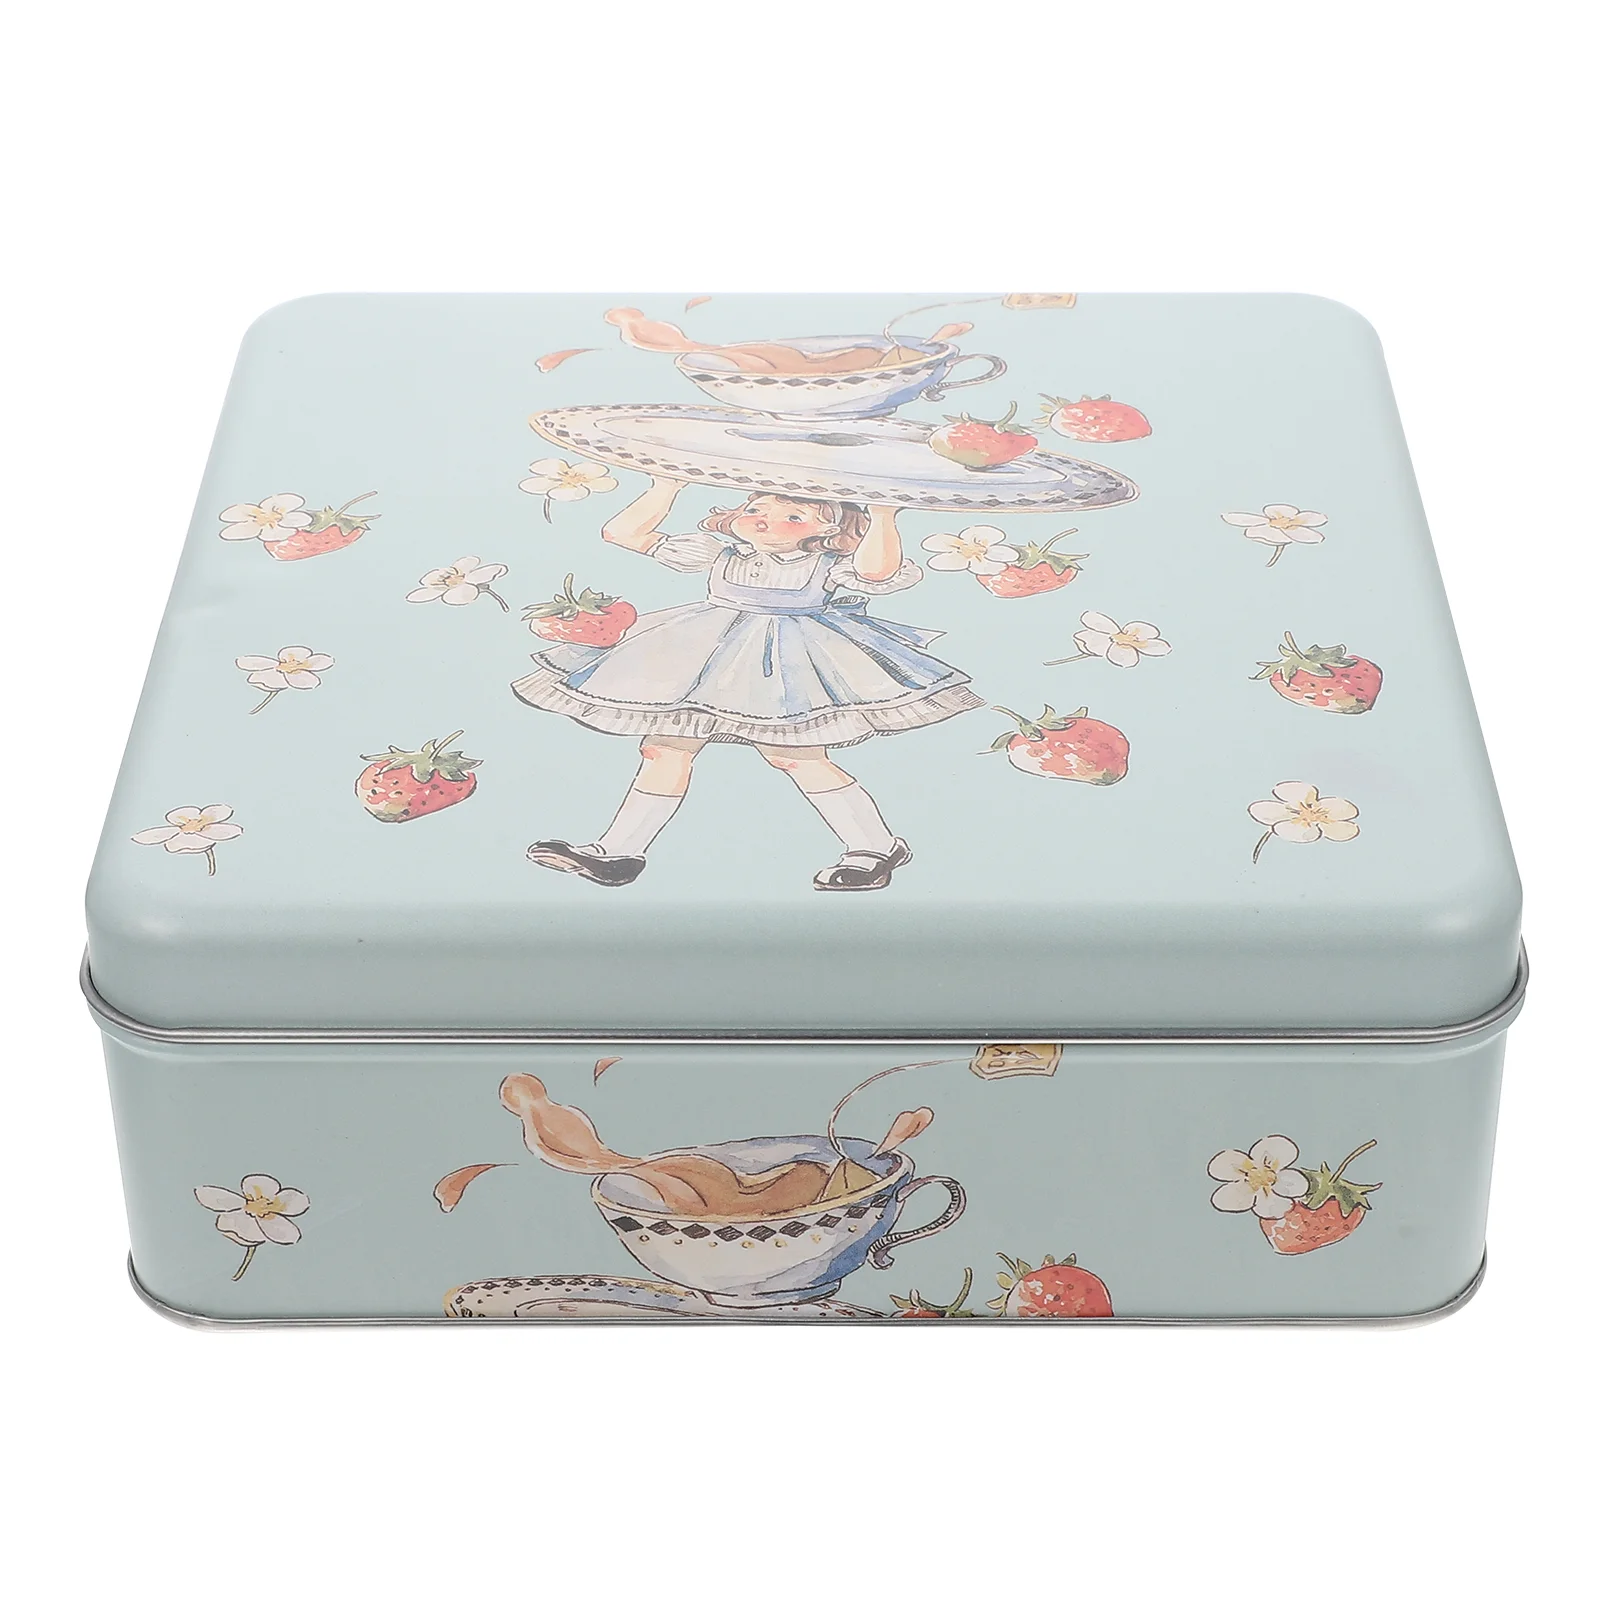 

Biscuit Tin Box Chocolate Cake Decorations Sweets Storage Holder Candy Tinplate Container Iron Jar Cookie Tins